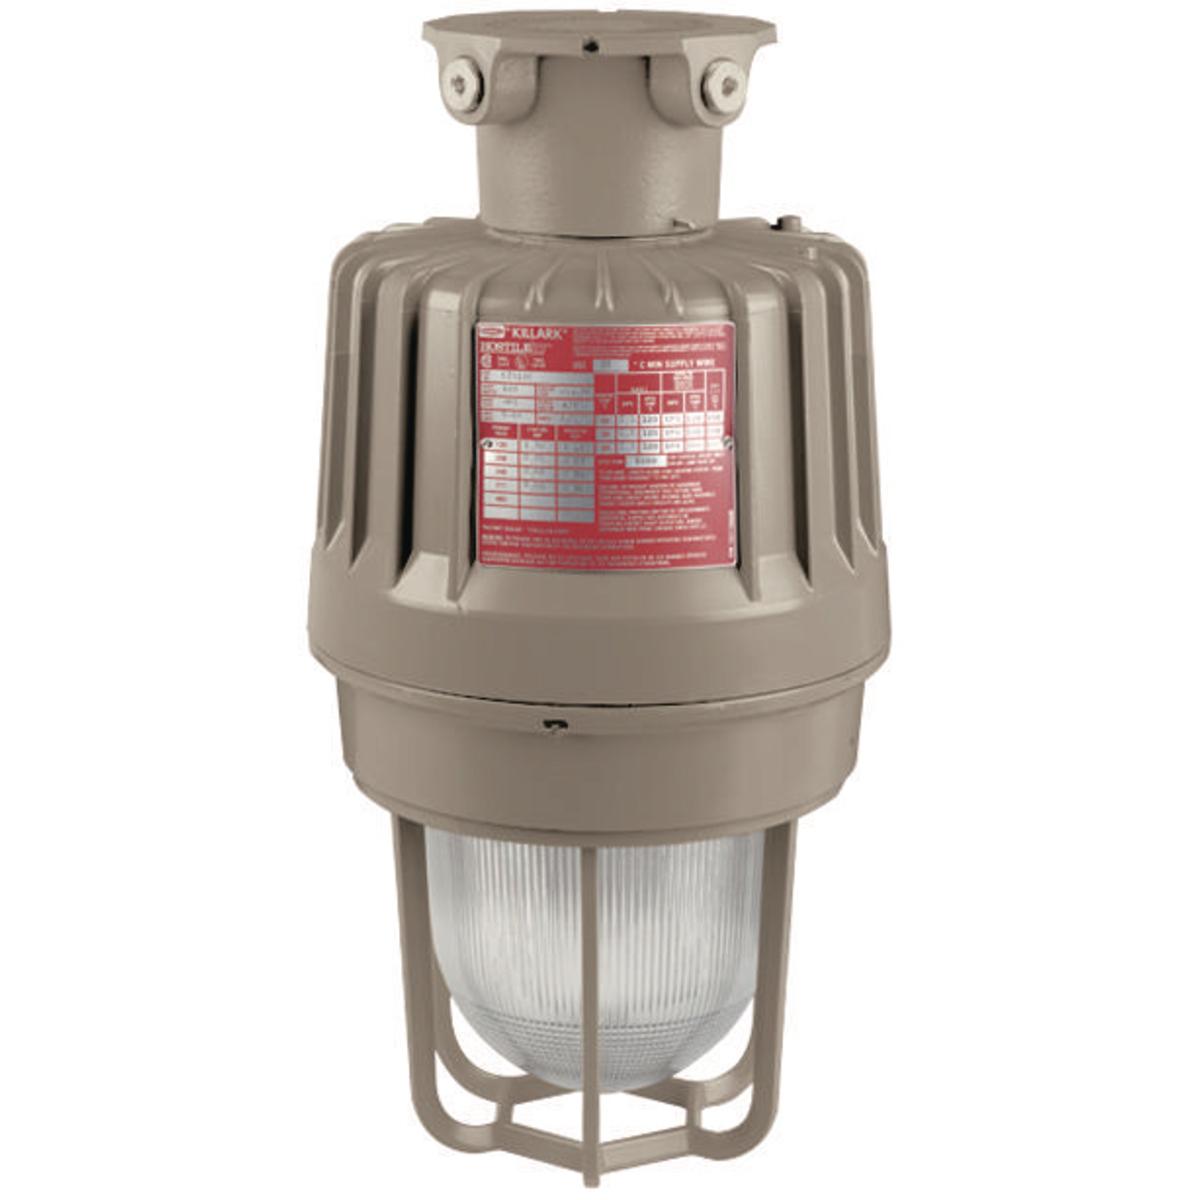 Hubbell EZL10030X3G EZL 120-277V 1" Ceiling Mount Fluted Globe with Guard  ; The EZL Series LED High Bay/ Low Bay fixtures are high quality explosion proof light fixtures. Designed to go into the harshest environments where explosive vapors are present .